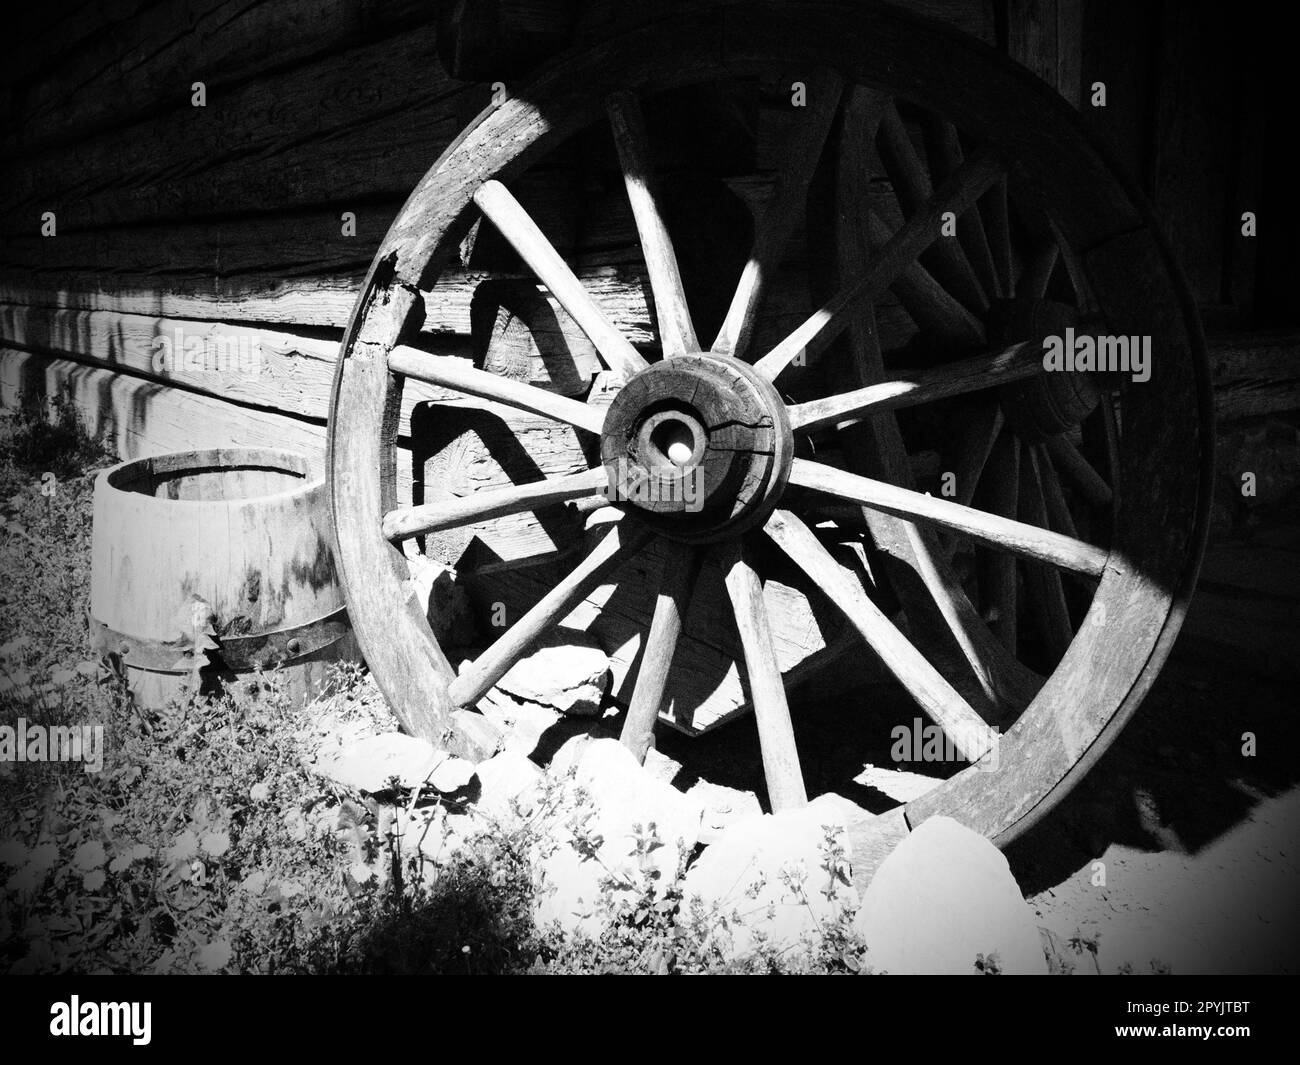 Wooden wheel from a cart. Decorative wheels for decorating lawns, exteriors and rustic interiors. Round homemade wheel against the wall. Retro or vintage style. Countryside life. Black and white Stock Photo